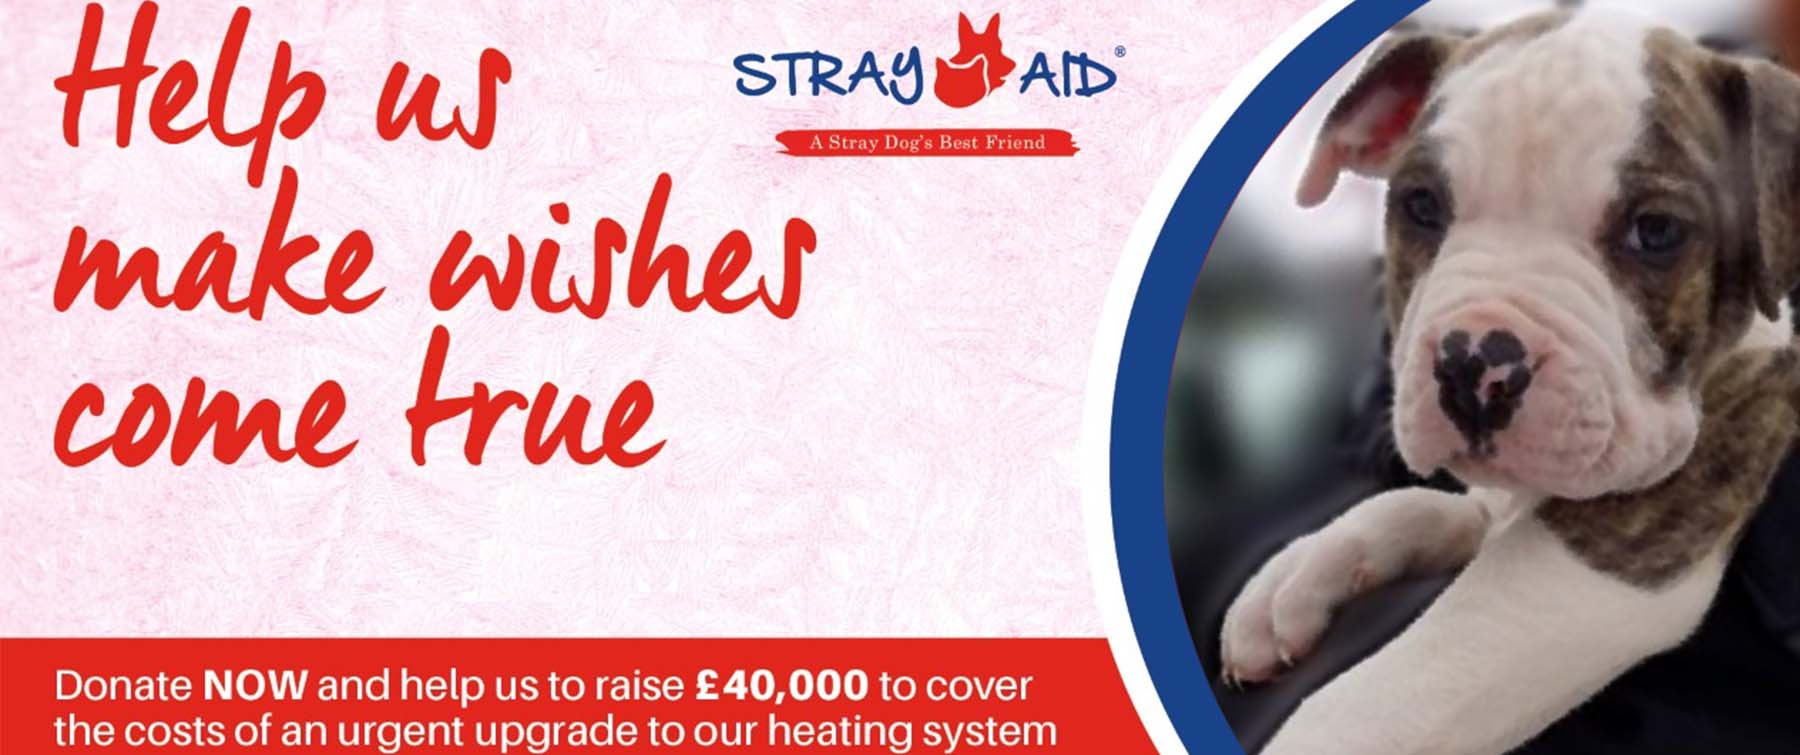 Stray Aid - The Urgent Heating Upgrade Appeal